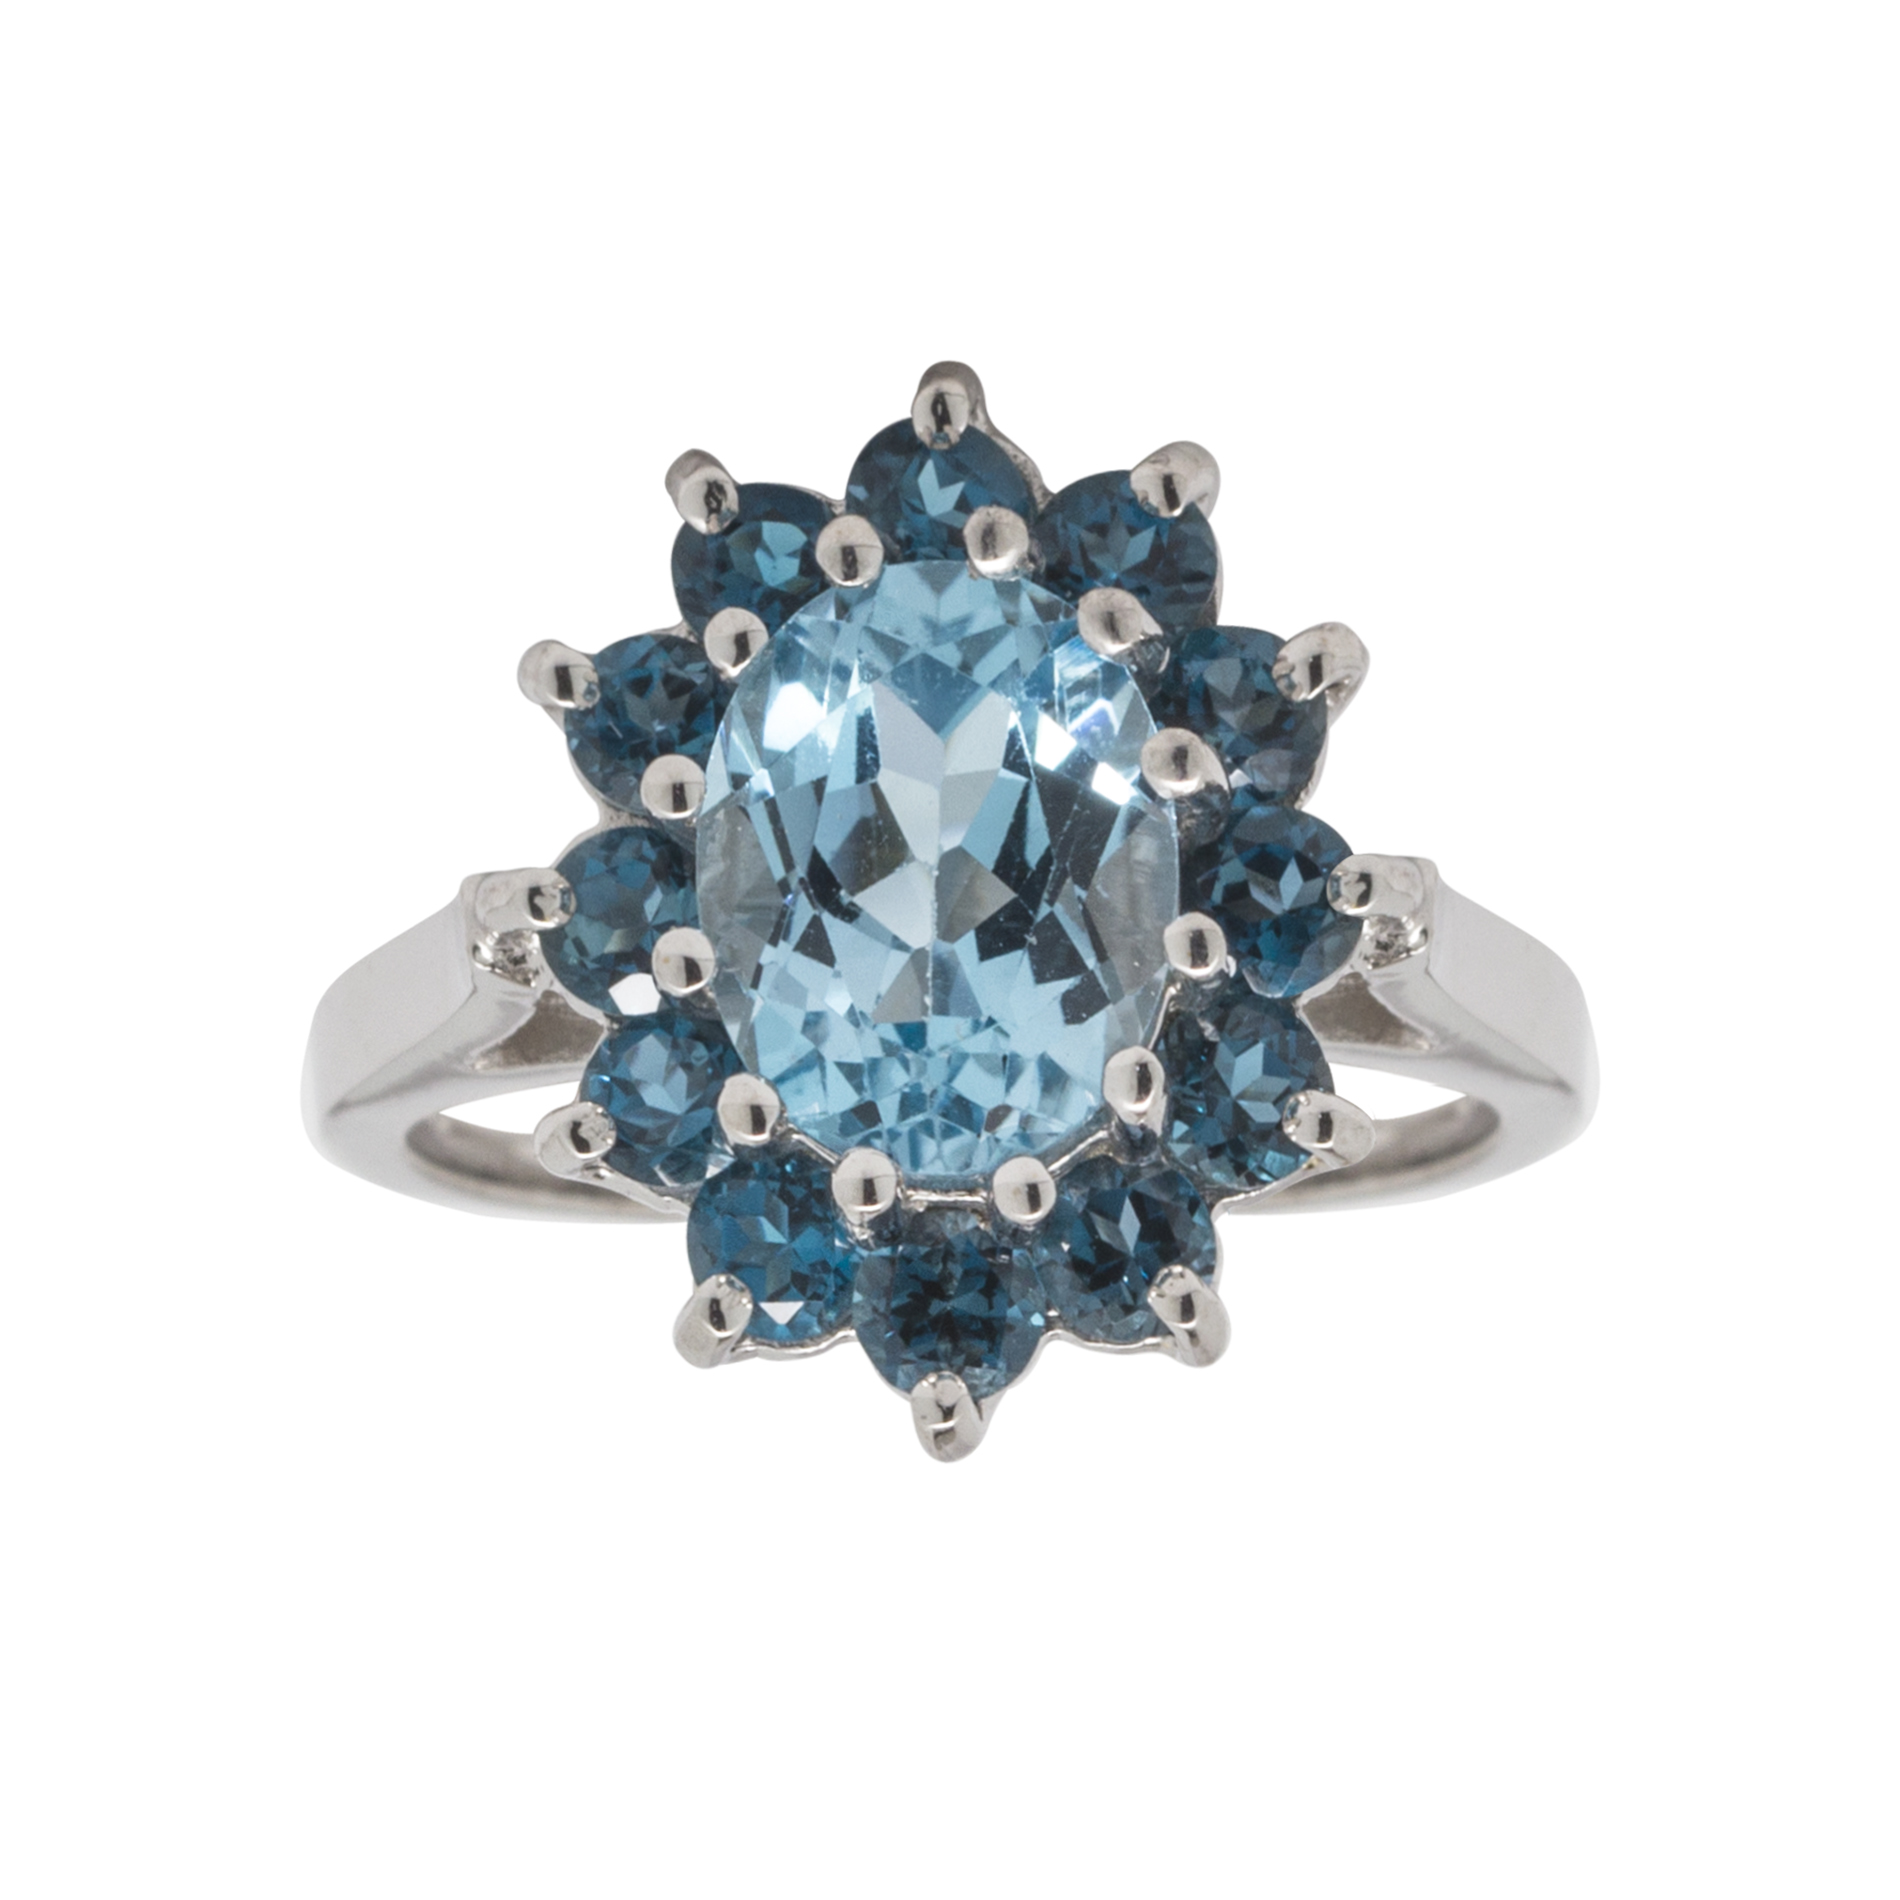 Swiss and London Blue Topaz Ring Sterling Silver